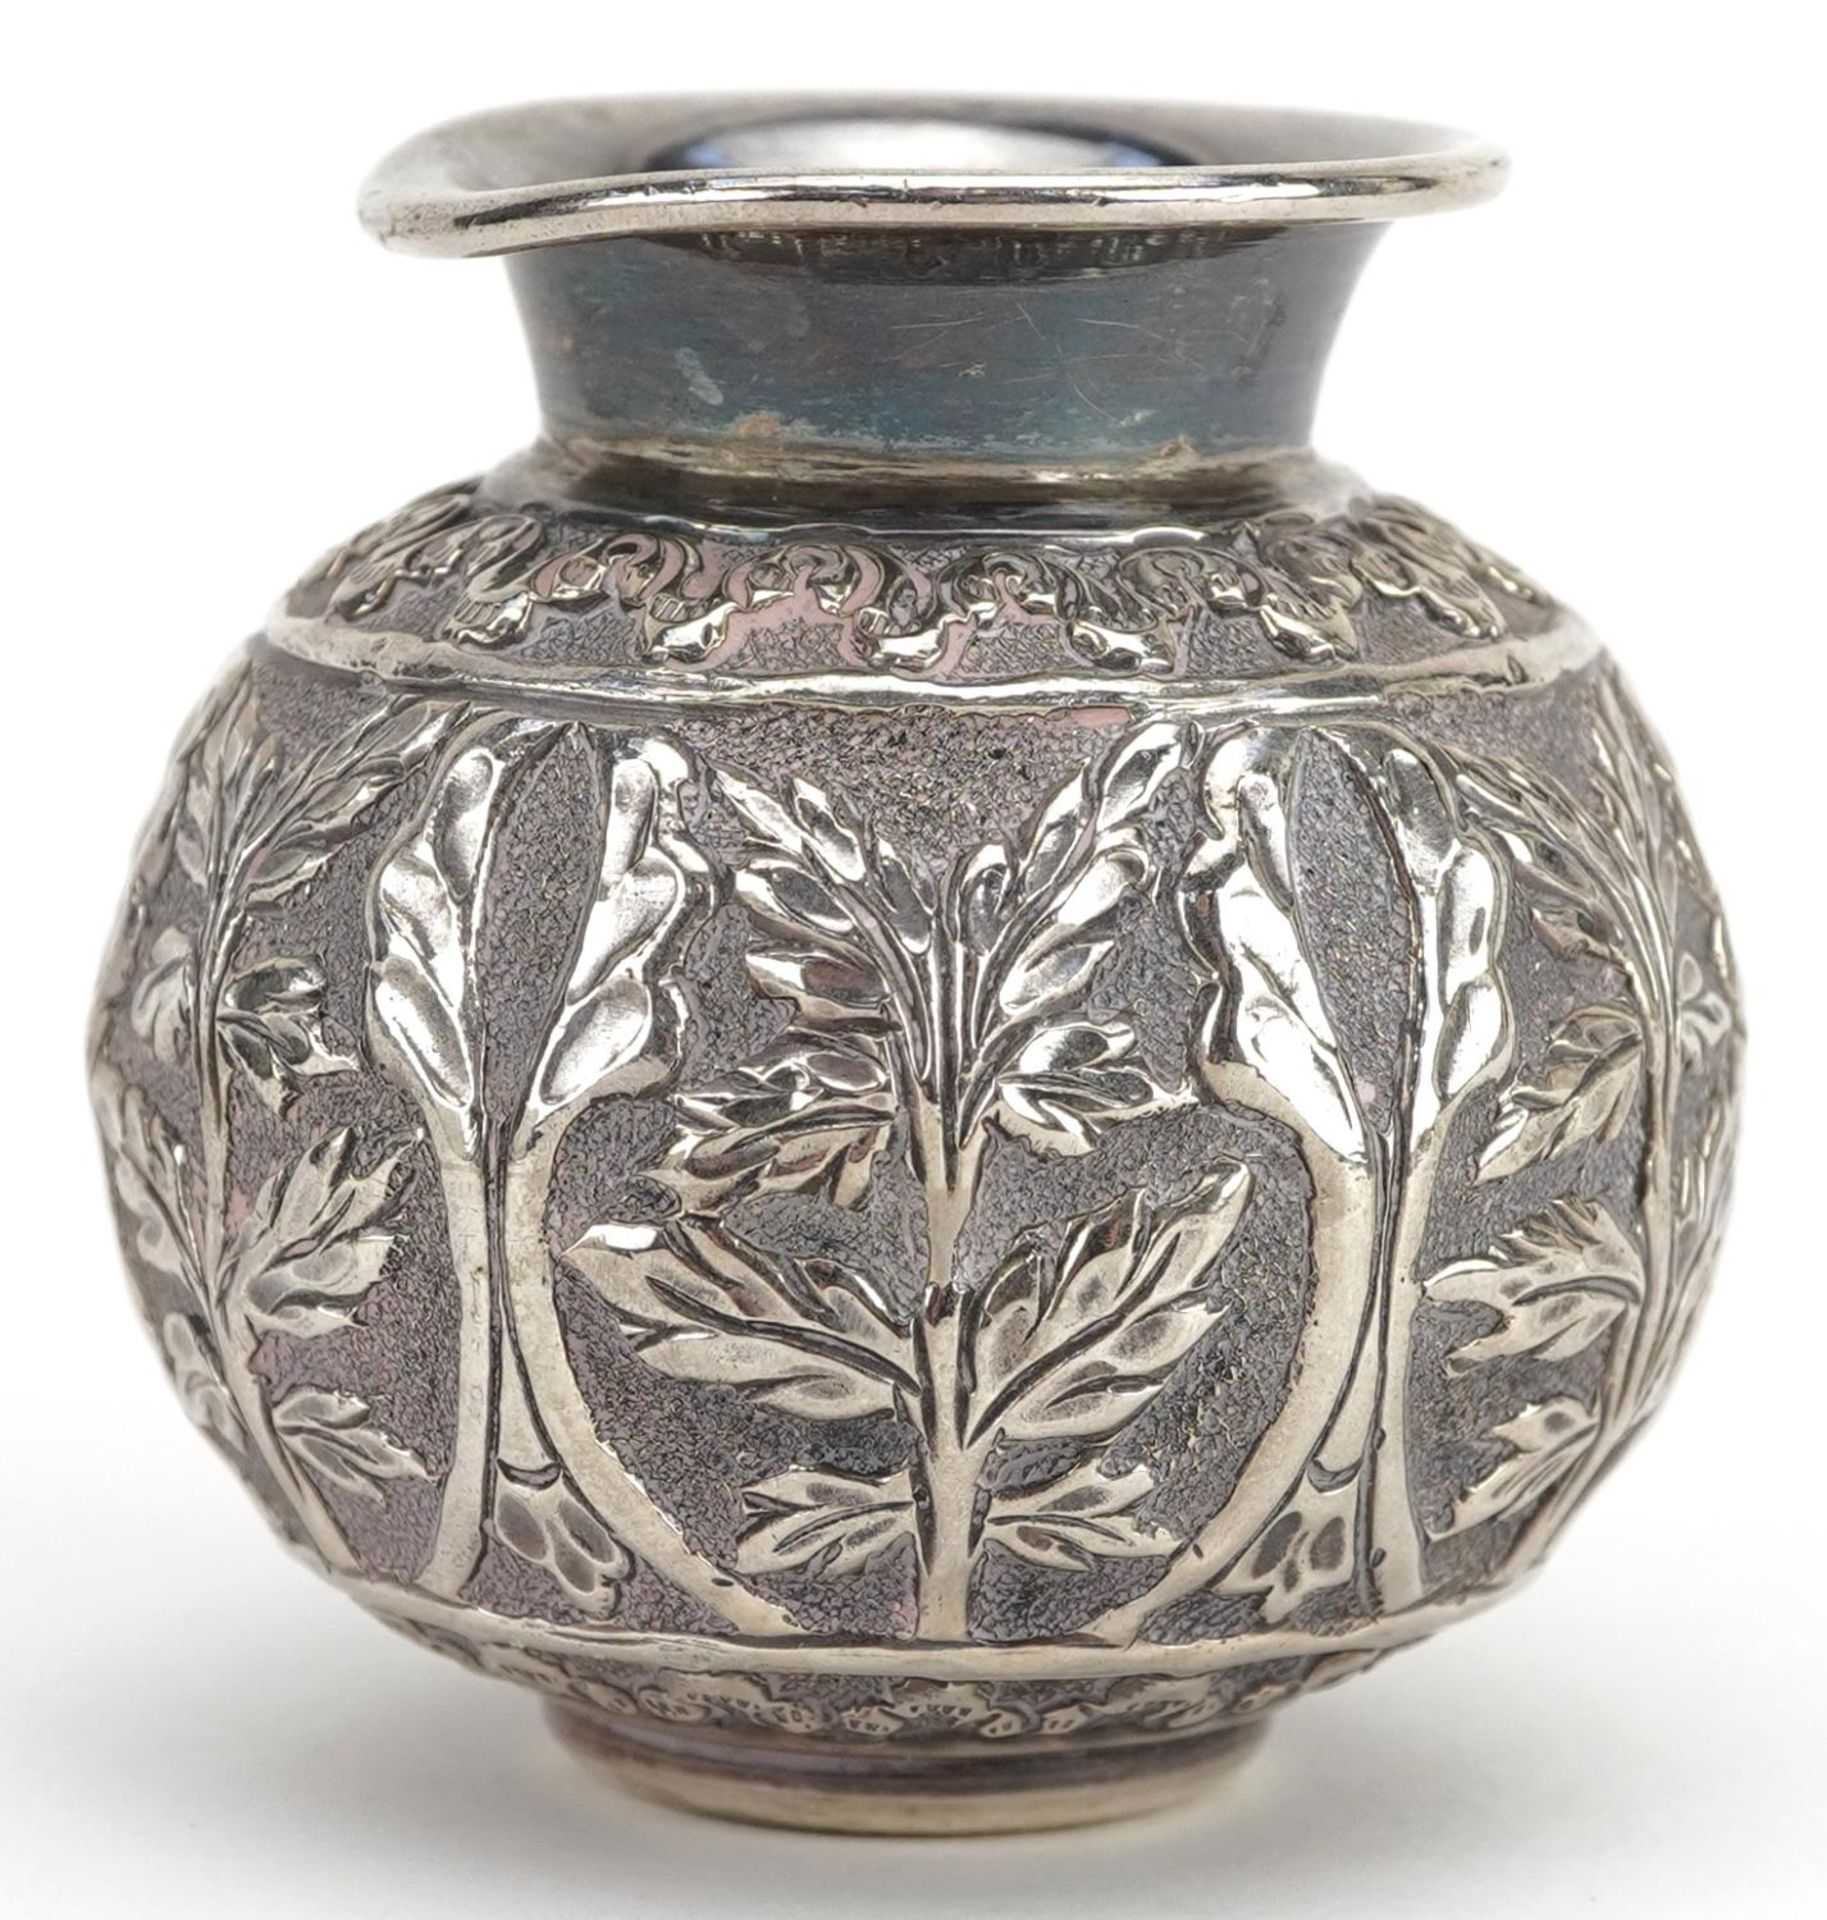 Asian 900 grade silver vase profusely embossed with foliage, 6cm high, 98.0g : For further